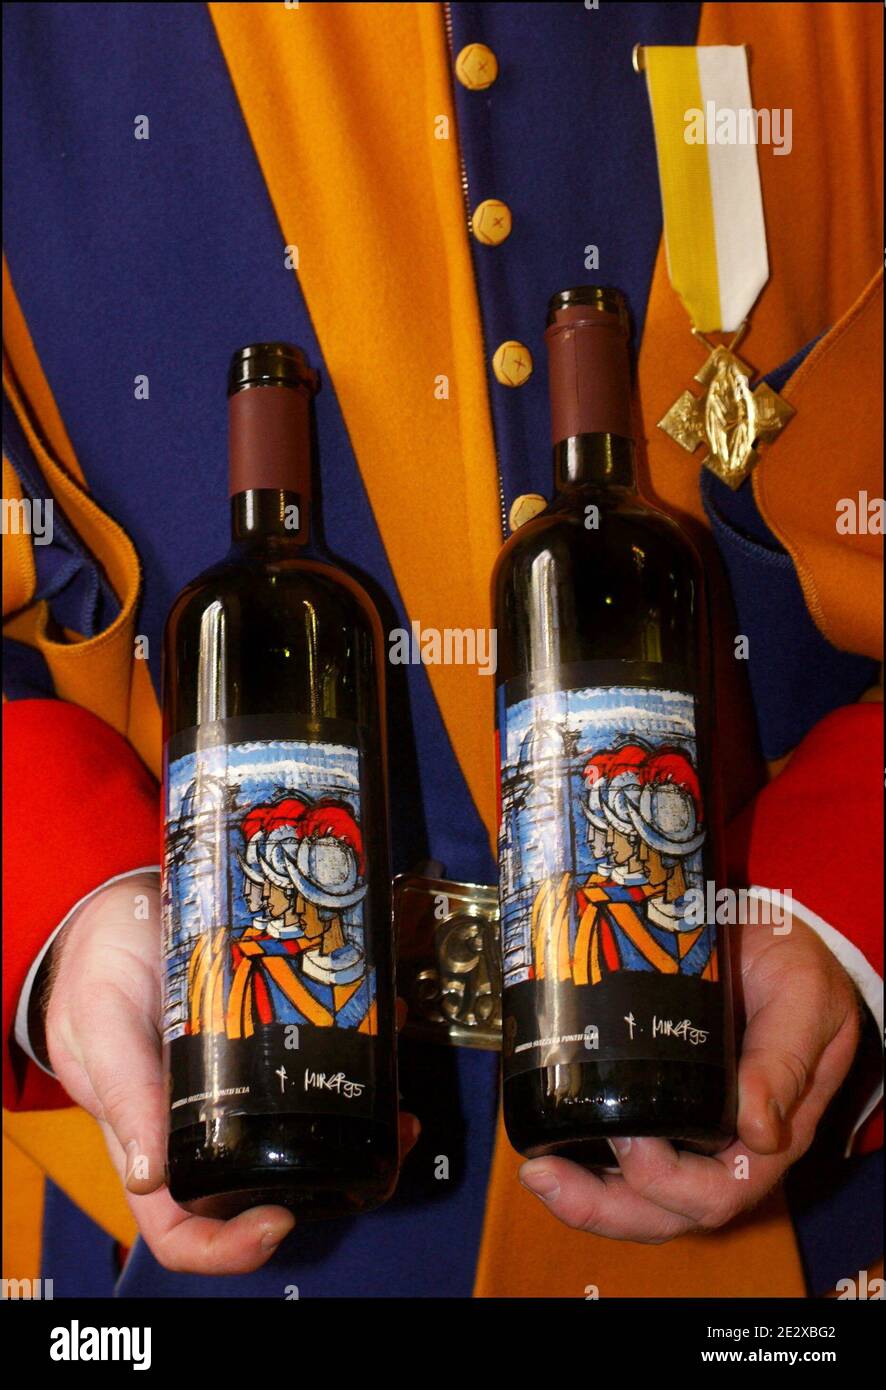 A visit at the heart of the Vatican, the world's smallest state. Bottle of Swiss Guard wine produced near Castelgandolfo, 20 kms from Rome, Vatican on May 2003. Photo by Eric Vandeville/ABACAPRESS.COM Stock Photo